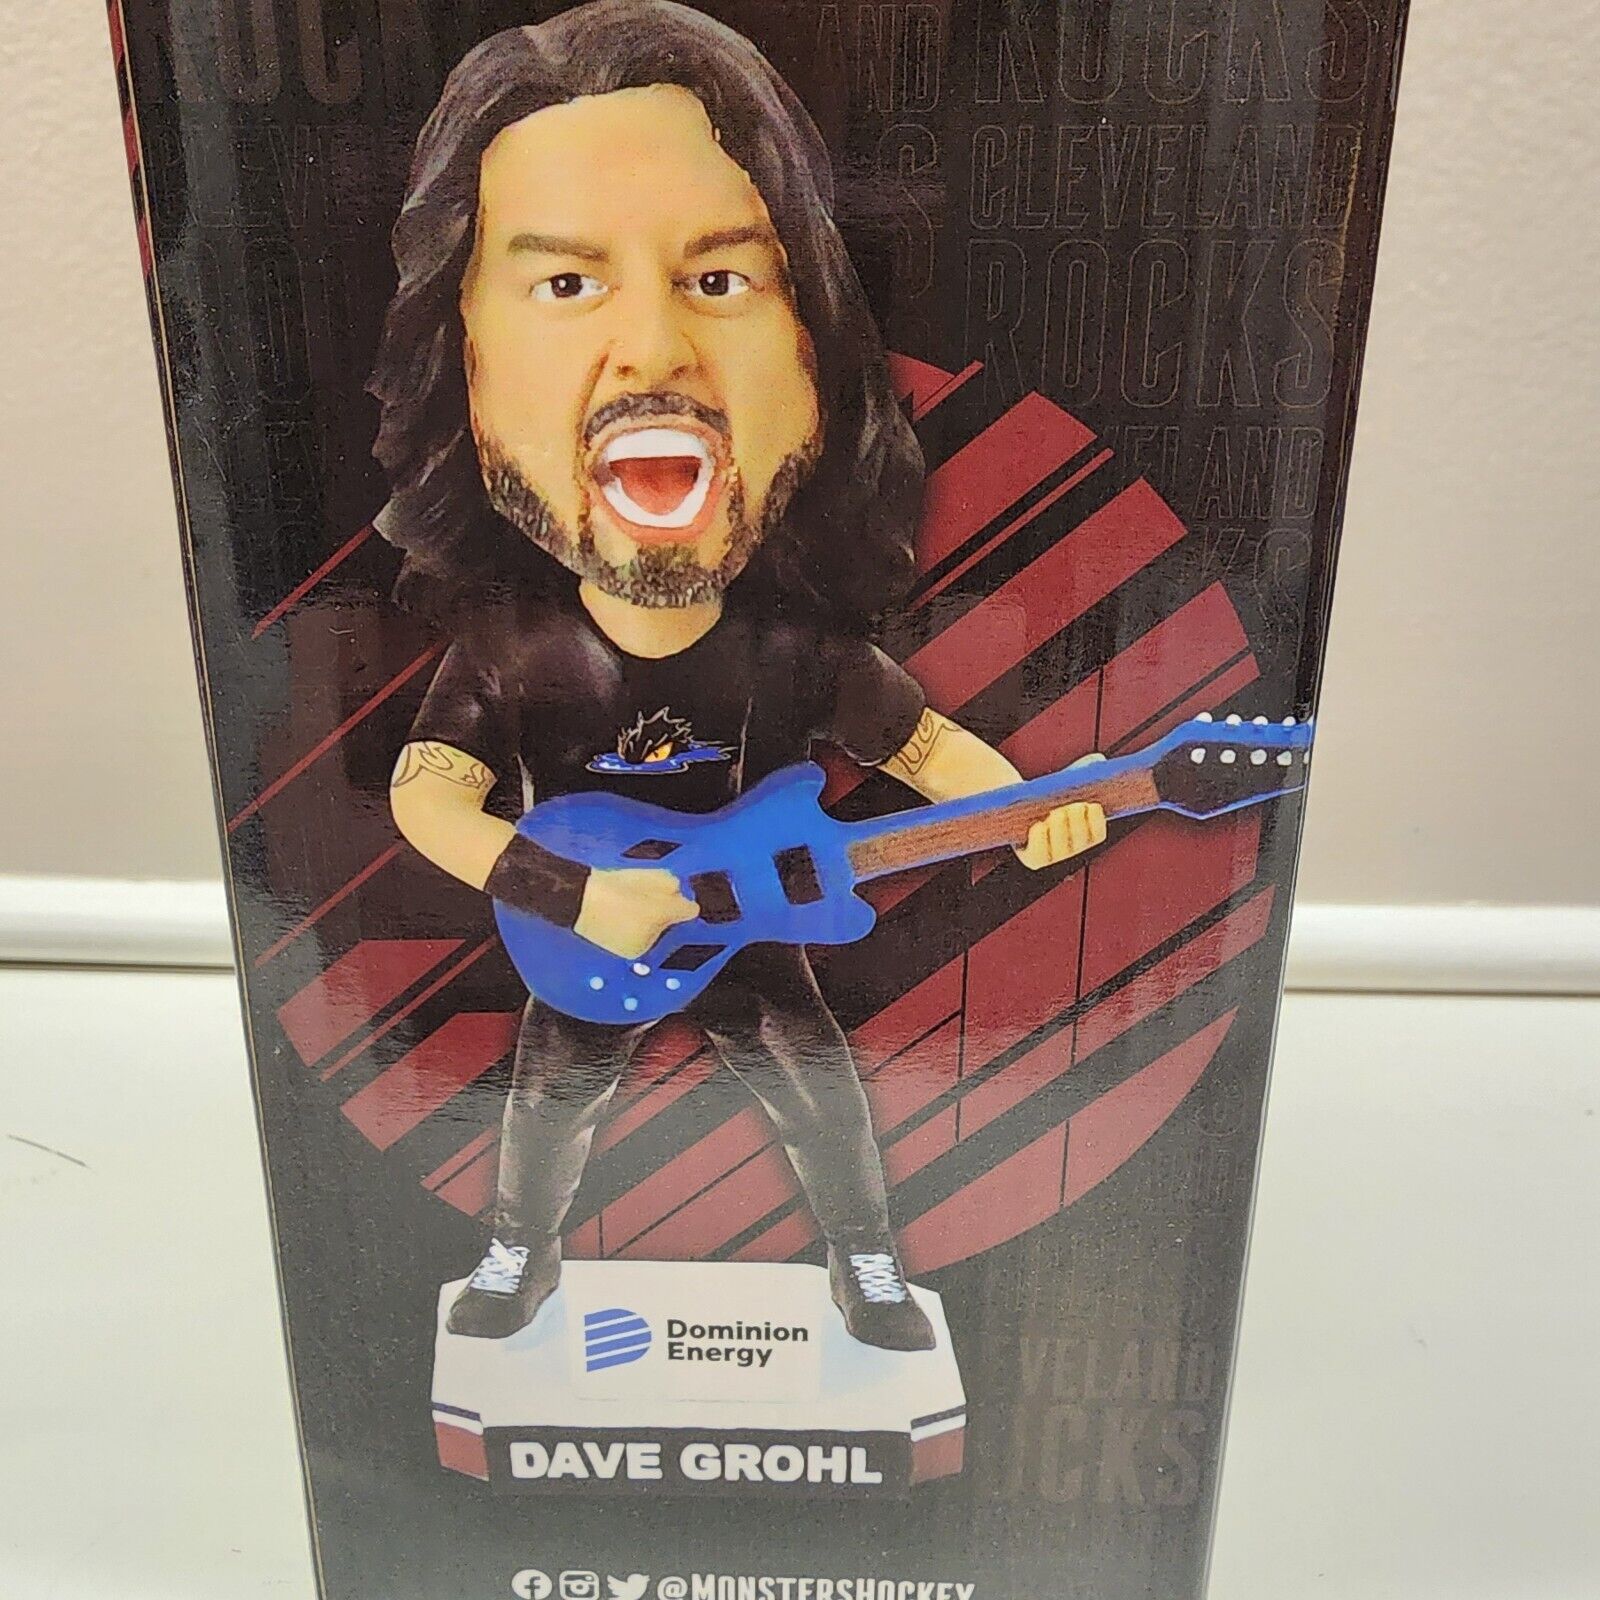 Dave Grohl Bobble Head Cleveland Rocks 